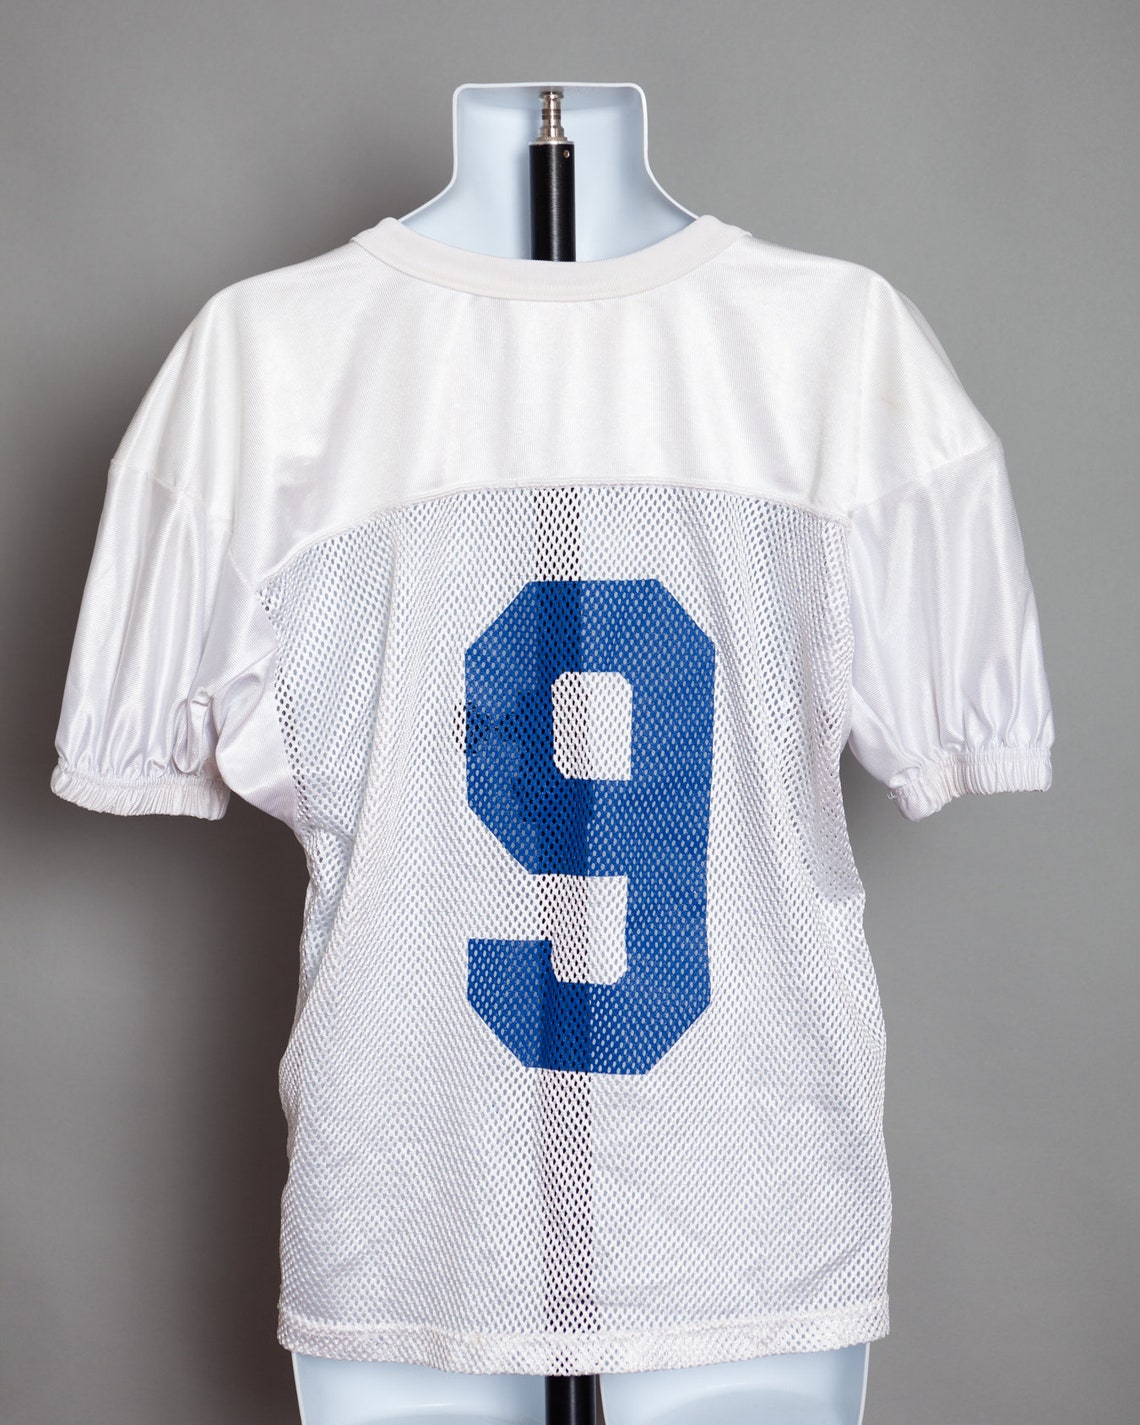 90s White and Blue Number 9 Football Jersey S-M | Etsy